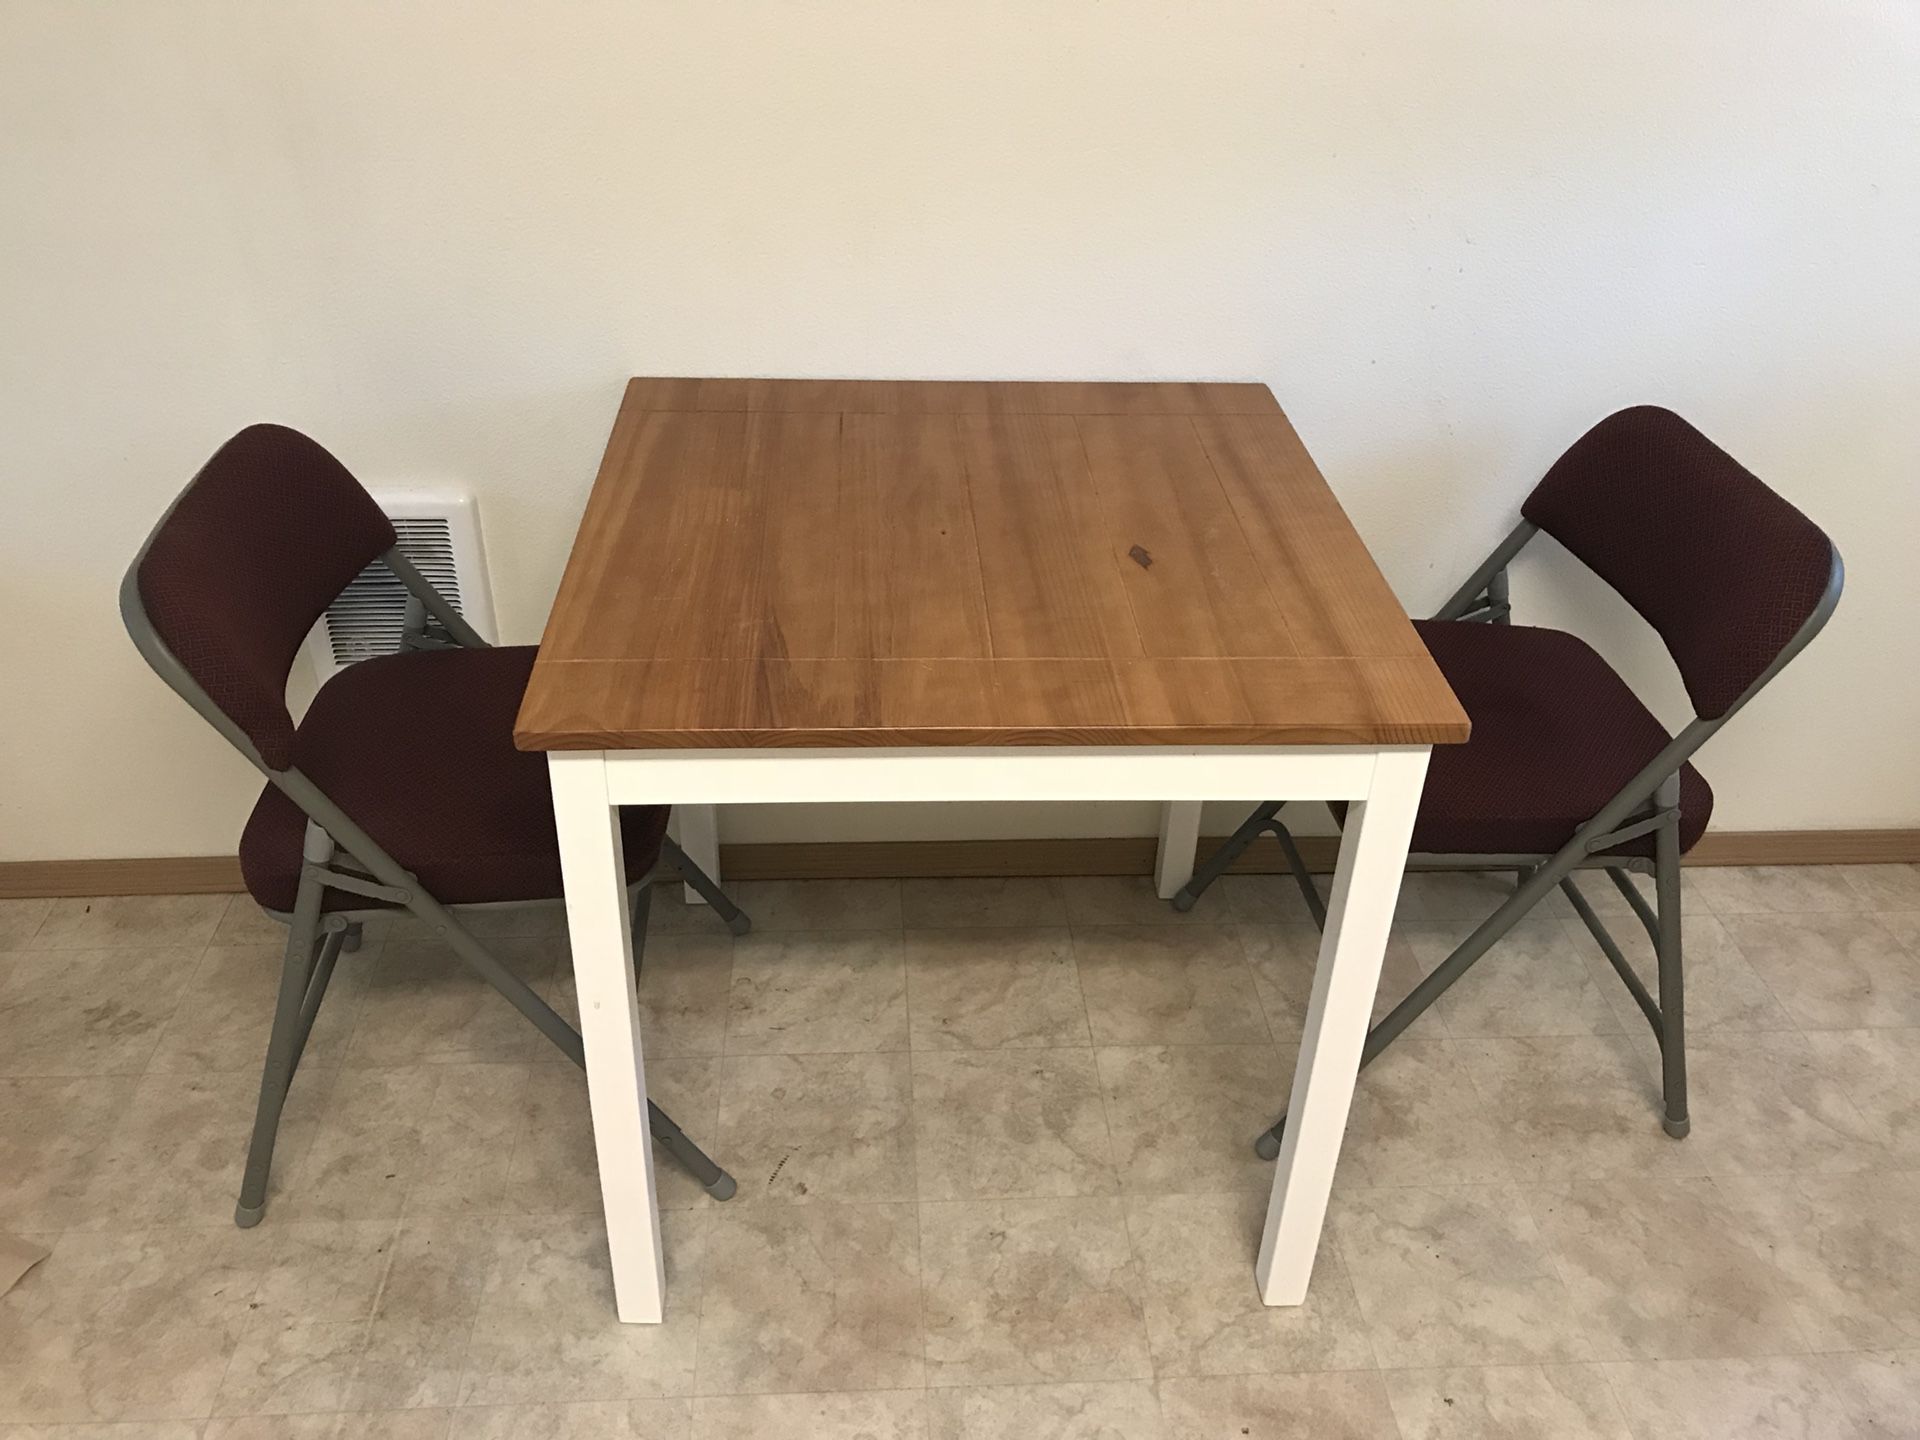 Square kitchen table and 2 chairs